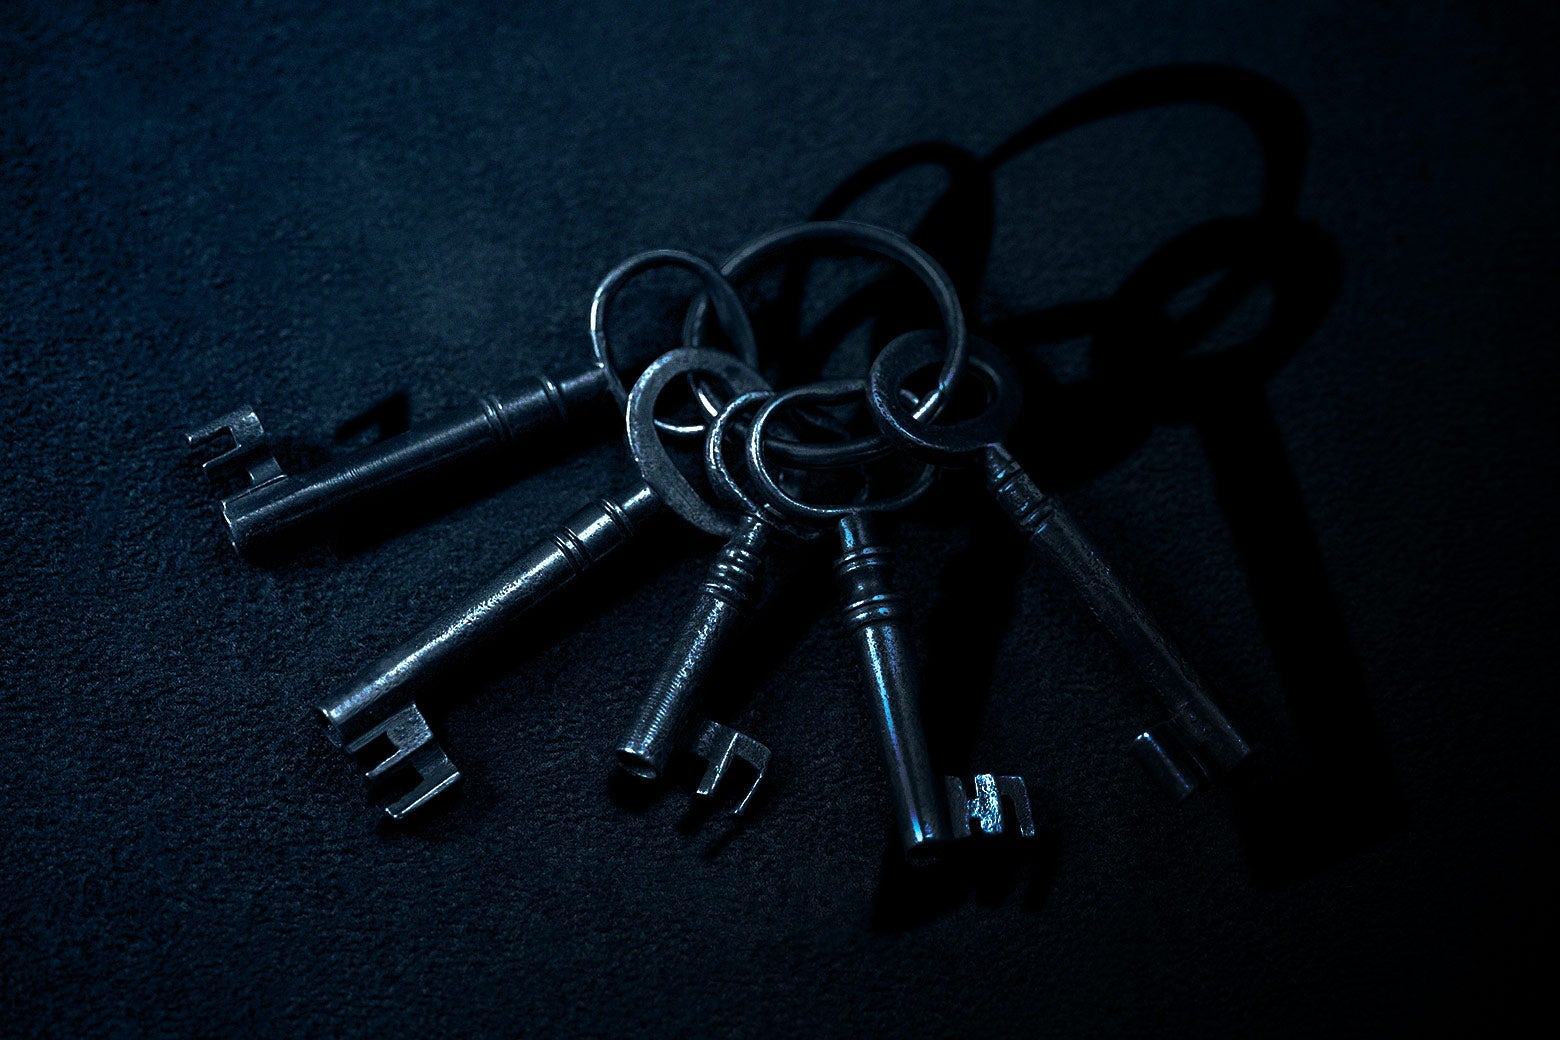 A key ring with several old-fashioned keys on it.